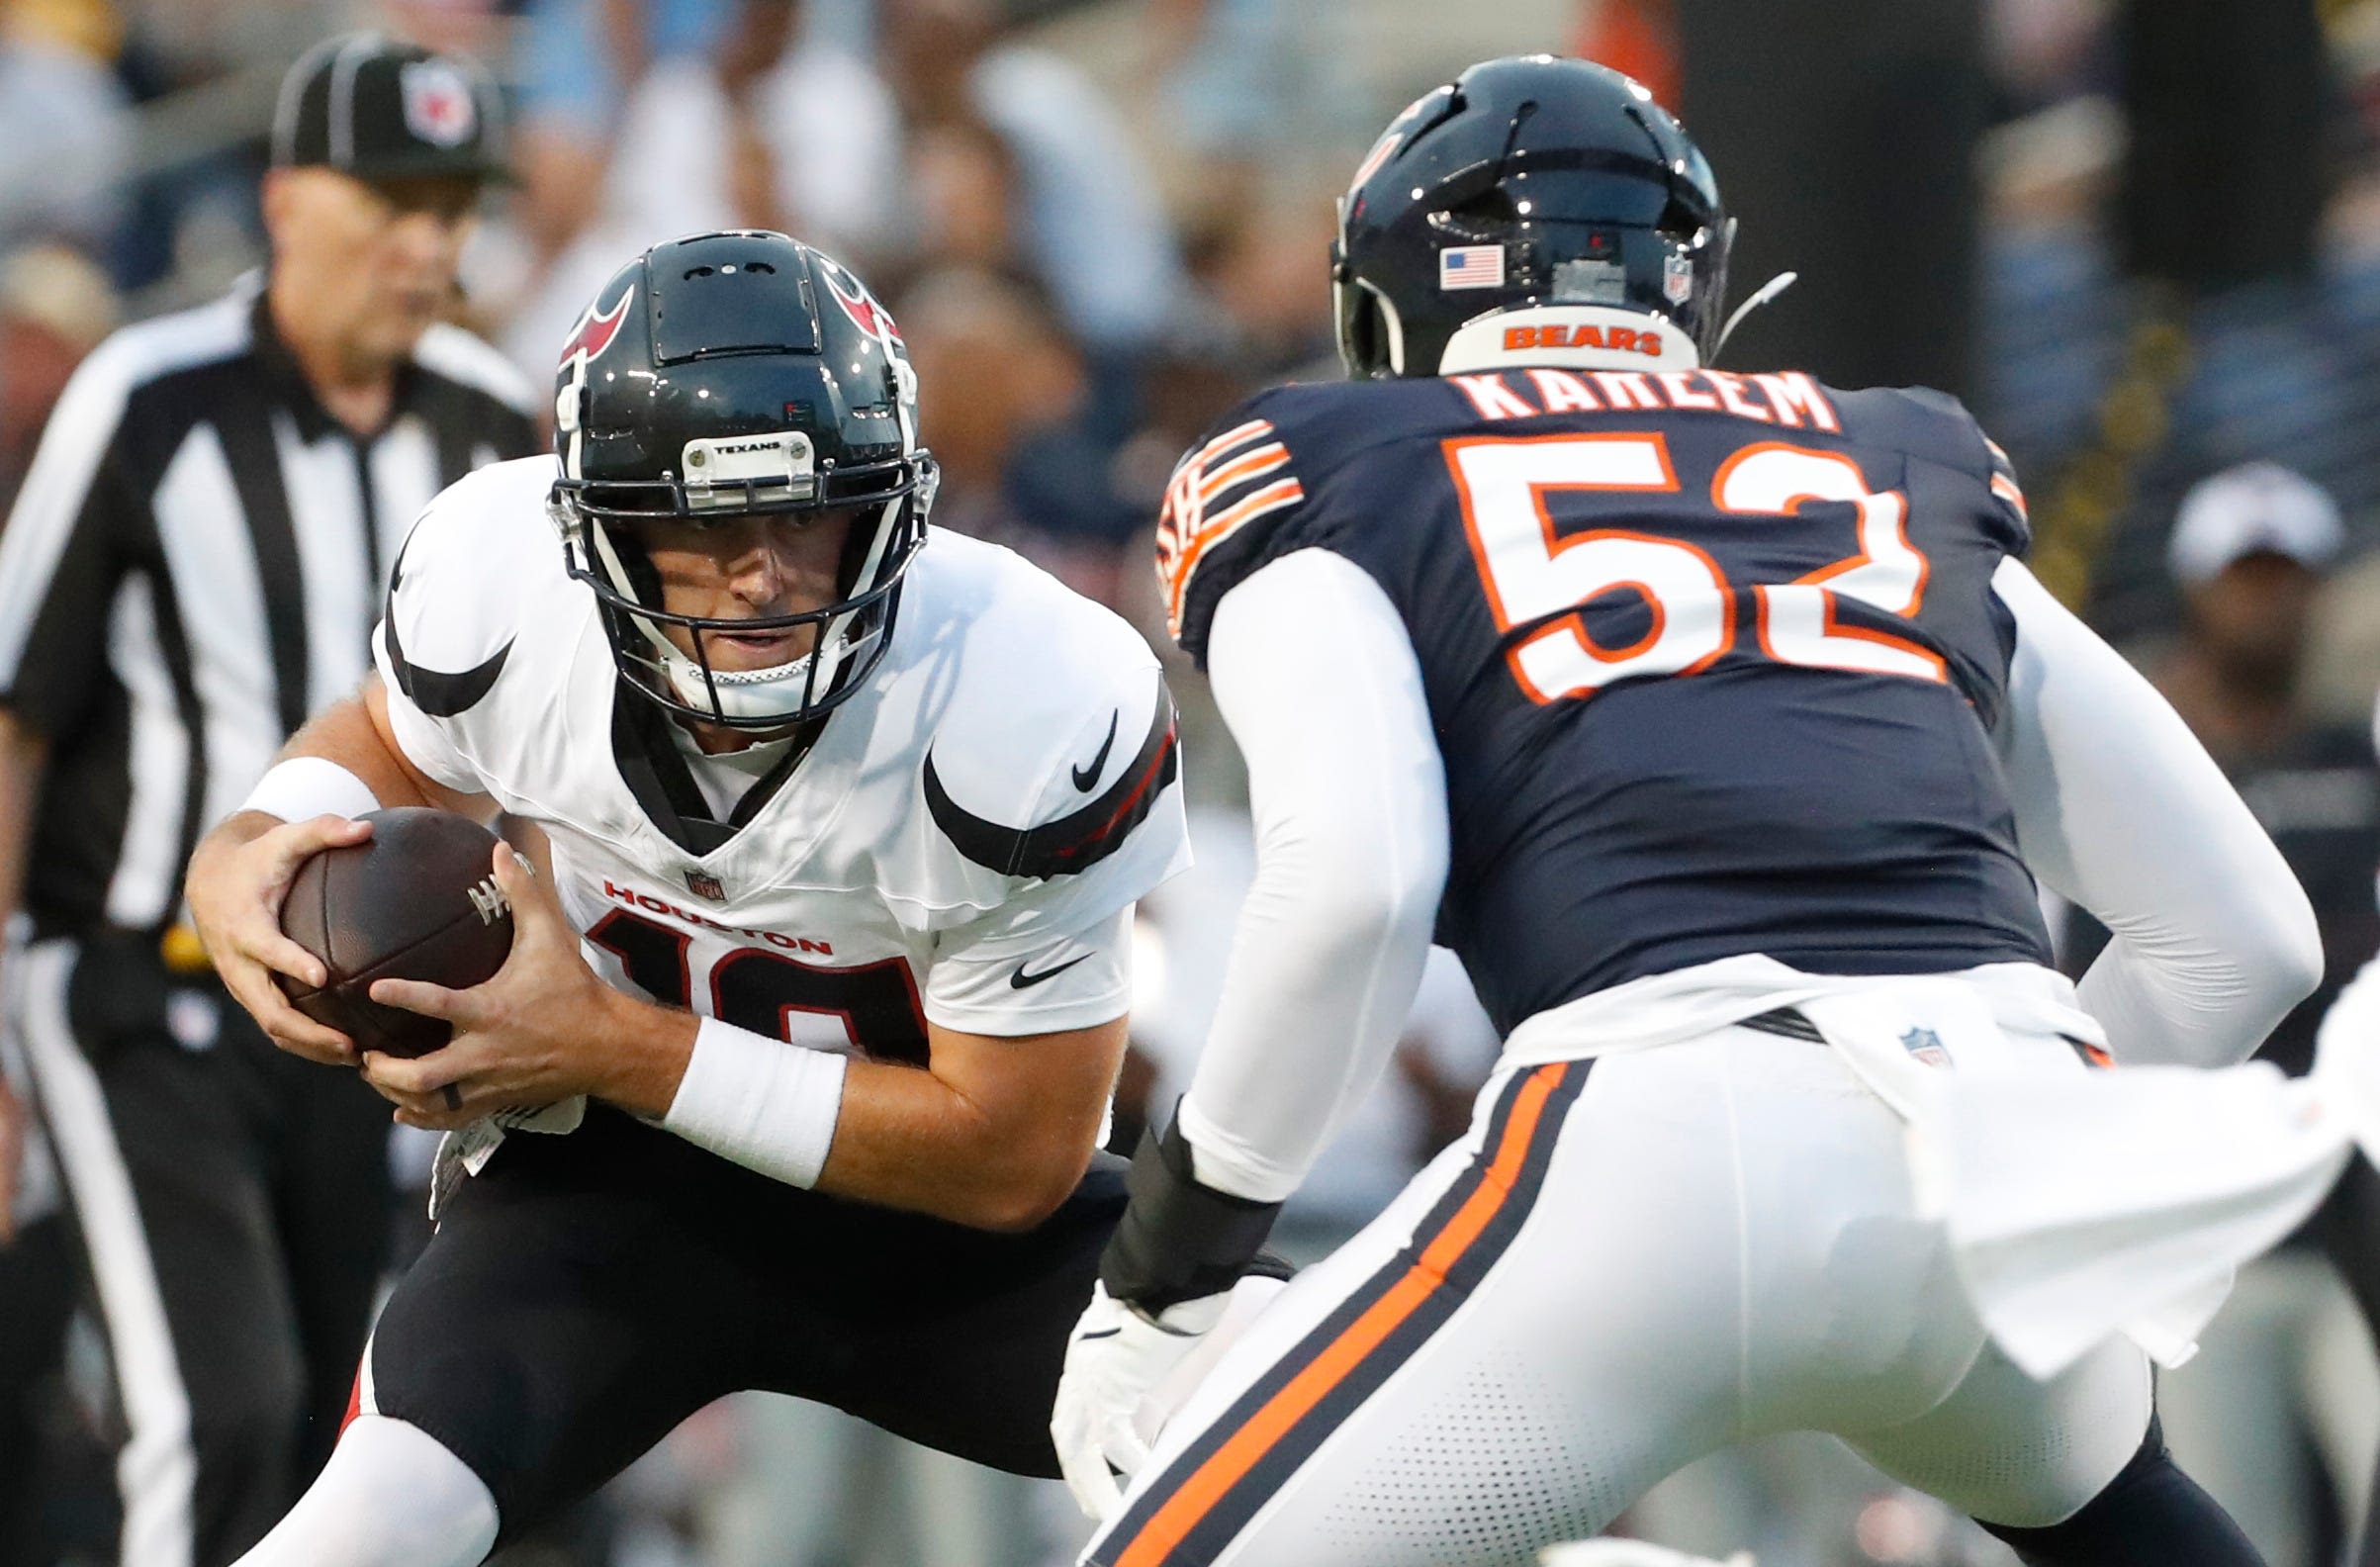 Bears vs Texans score, highlights: Storms end NFL's Hall of Fame Game in Canton early